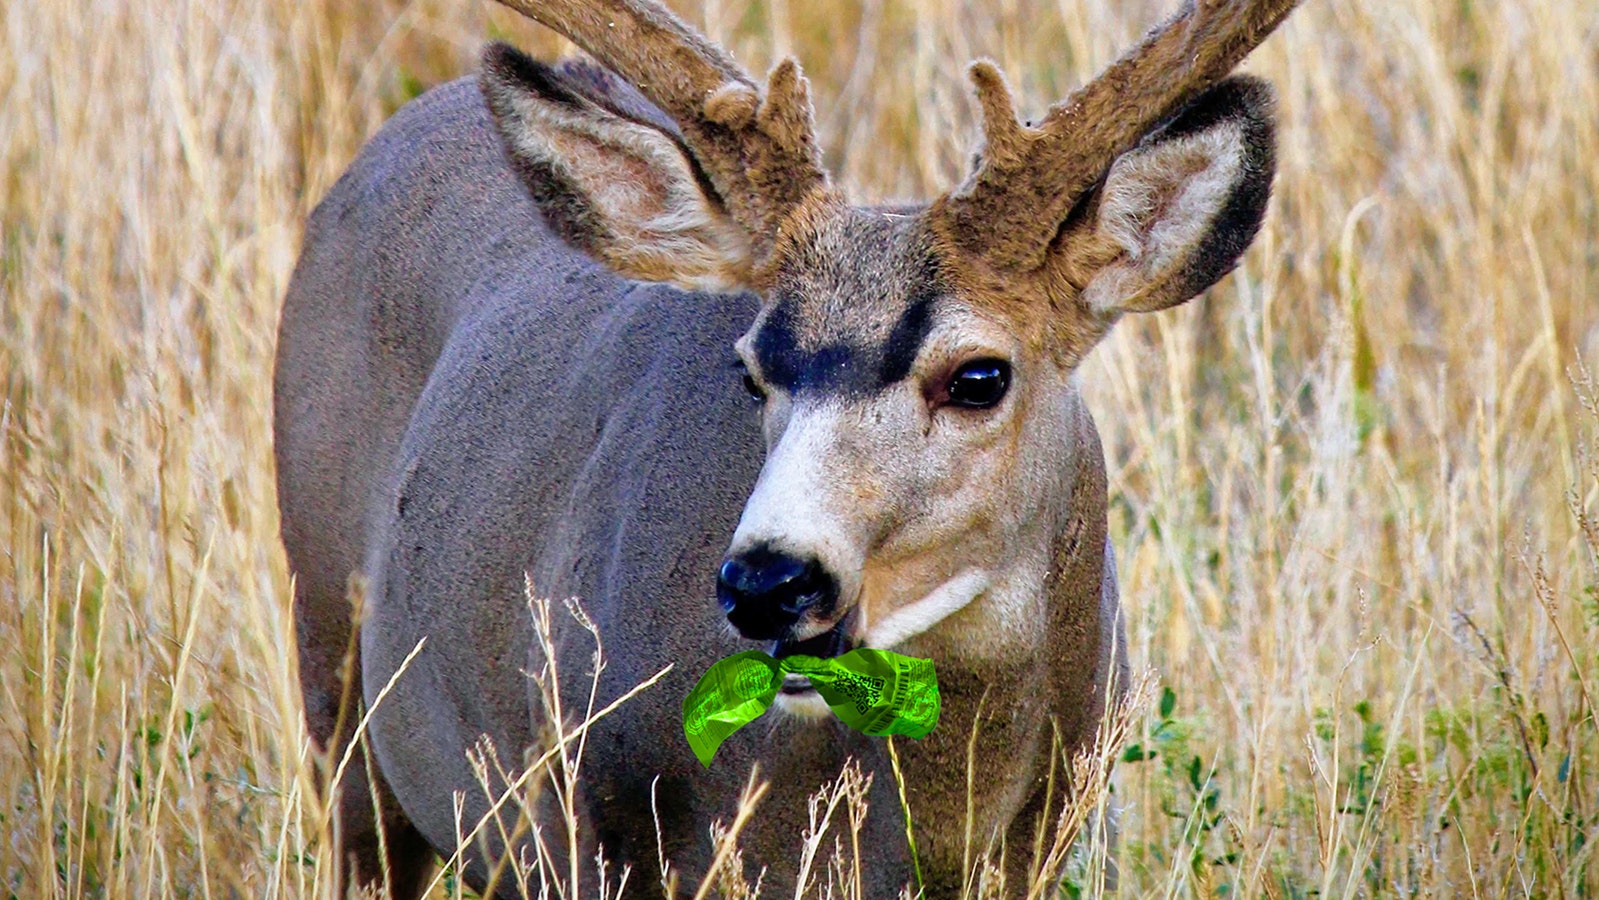 “Eating your tag” is a common saying among hunters, referencing an unsuccessful deer season. The “let a deer walk” prize drawing ask hunters to leave their tags unfilled this fall.